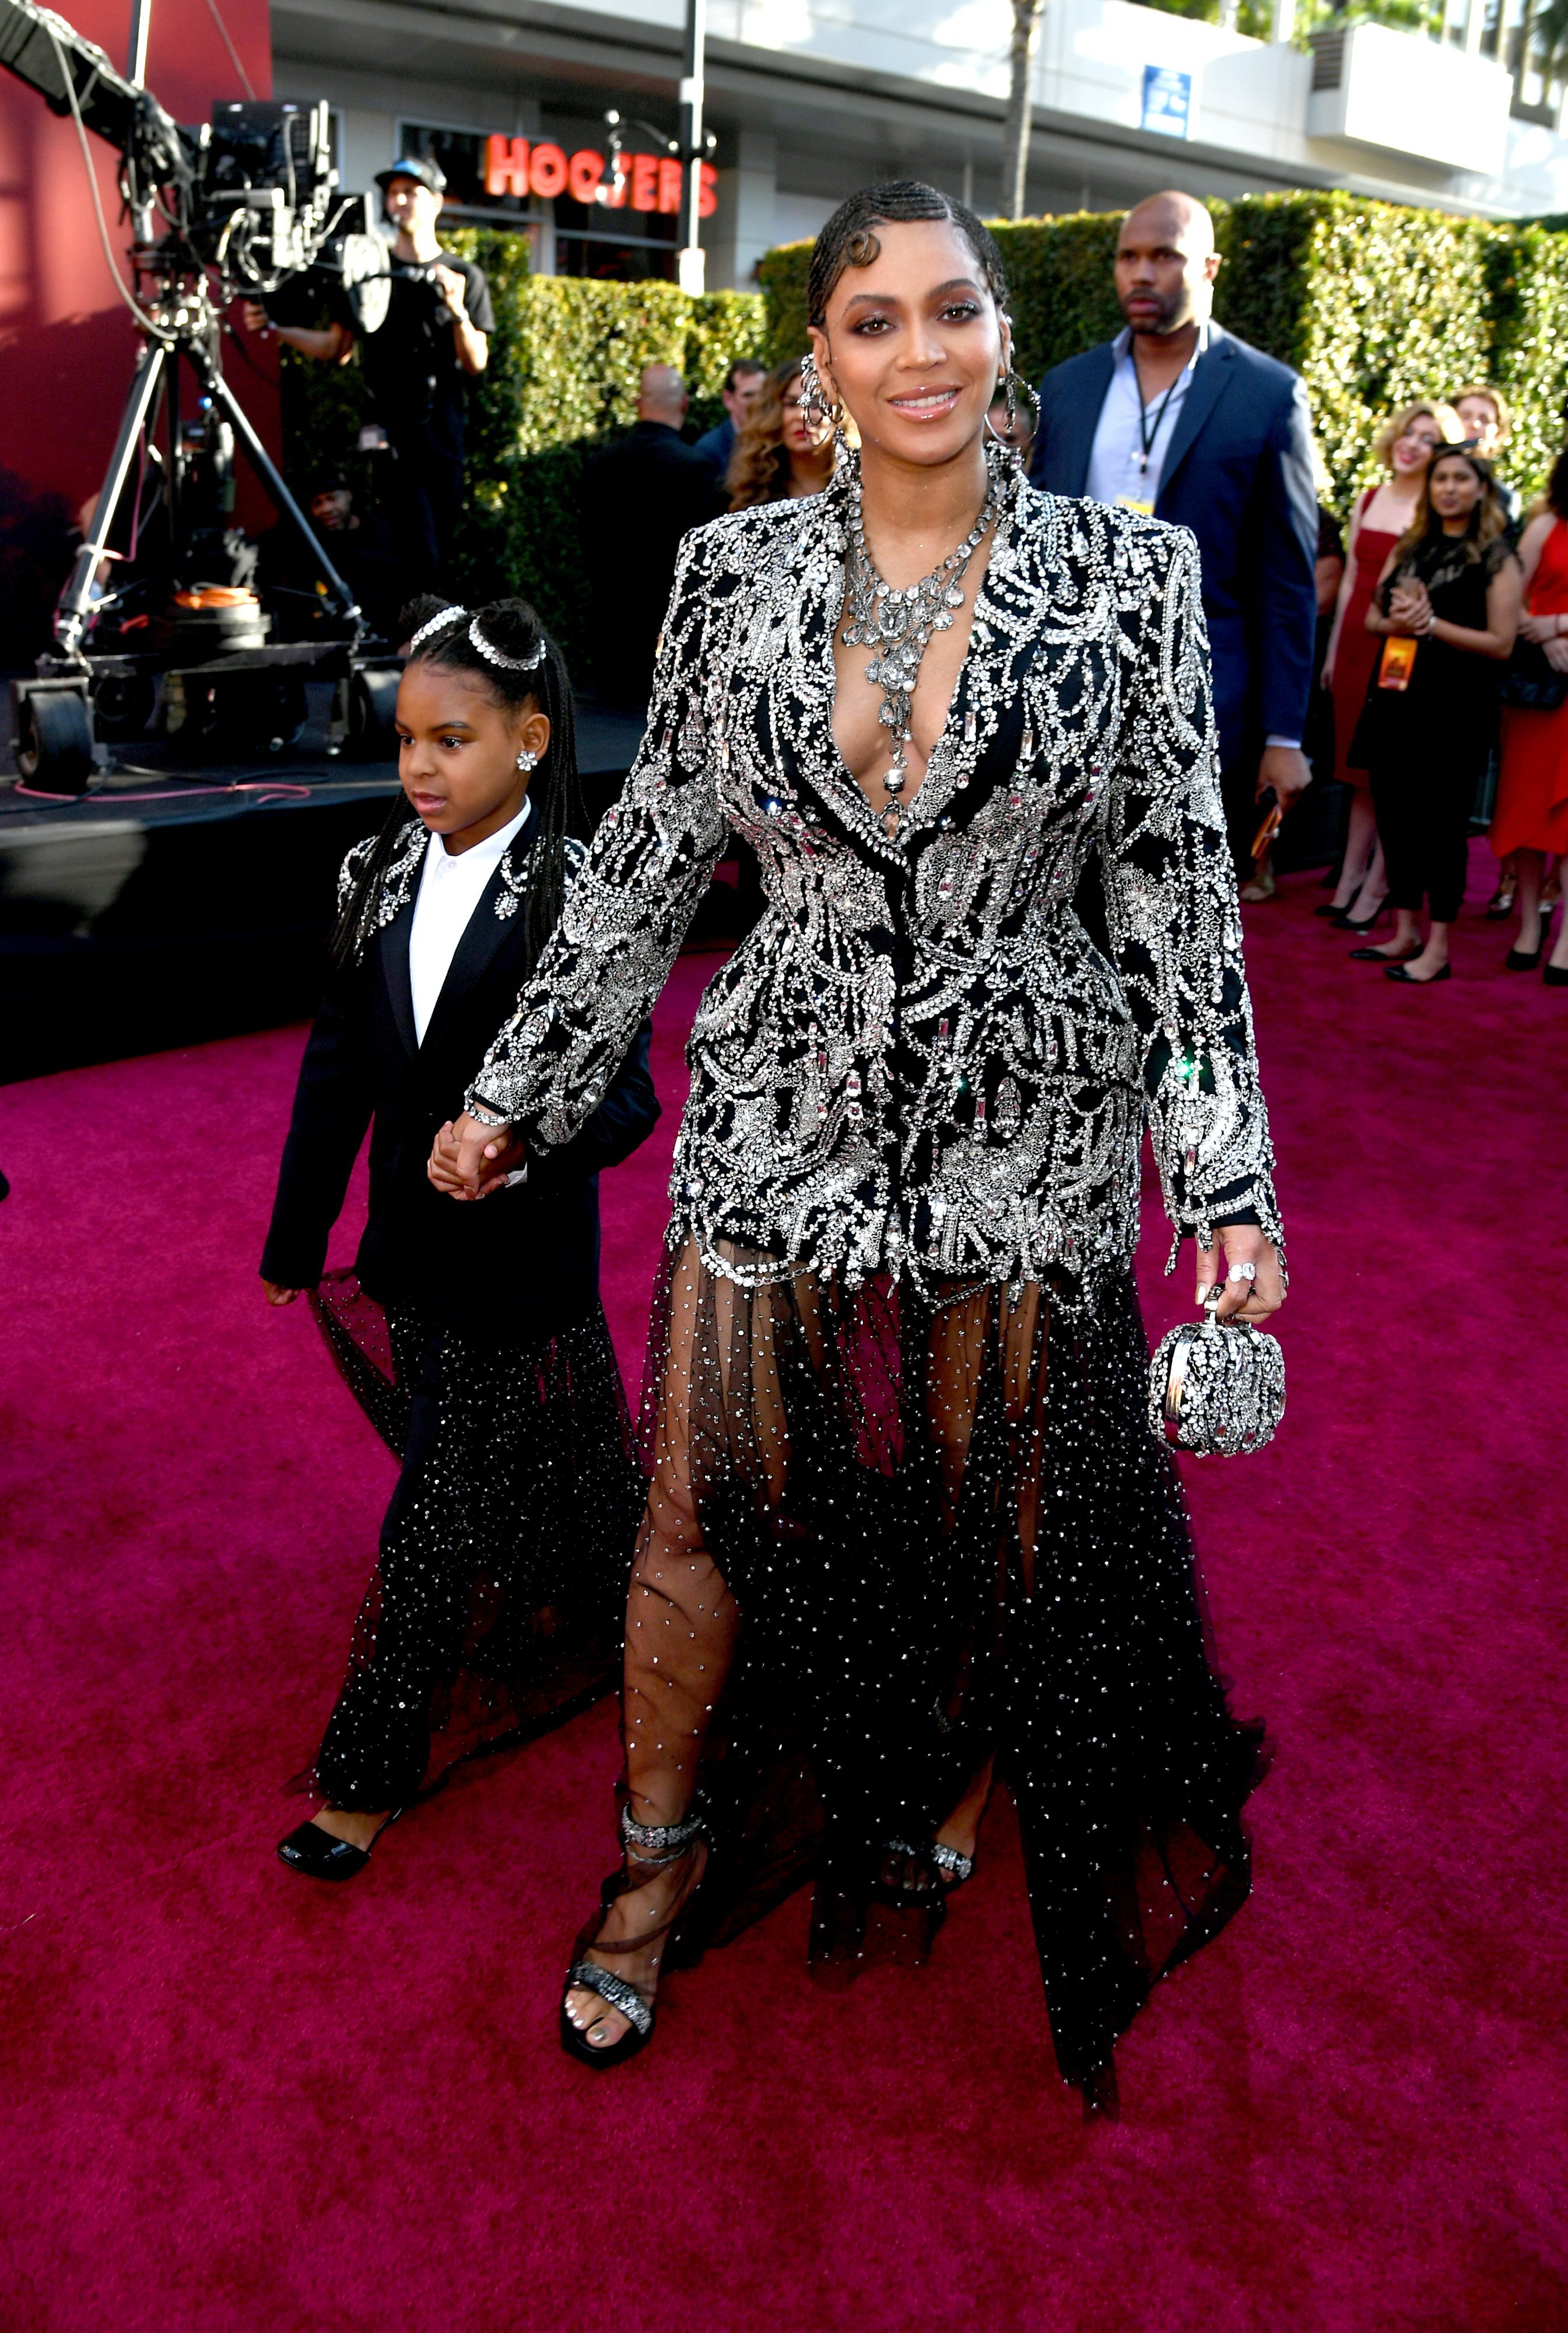 Beyonce and daughter Blue Ivy attend the World Premiere of Disney's "THE LION KING" at the Dolby Theatre on July 09, 2019. | Photo: GettyImages